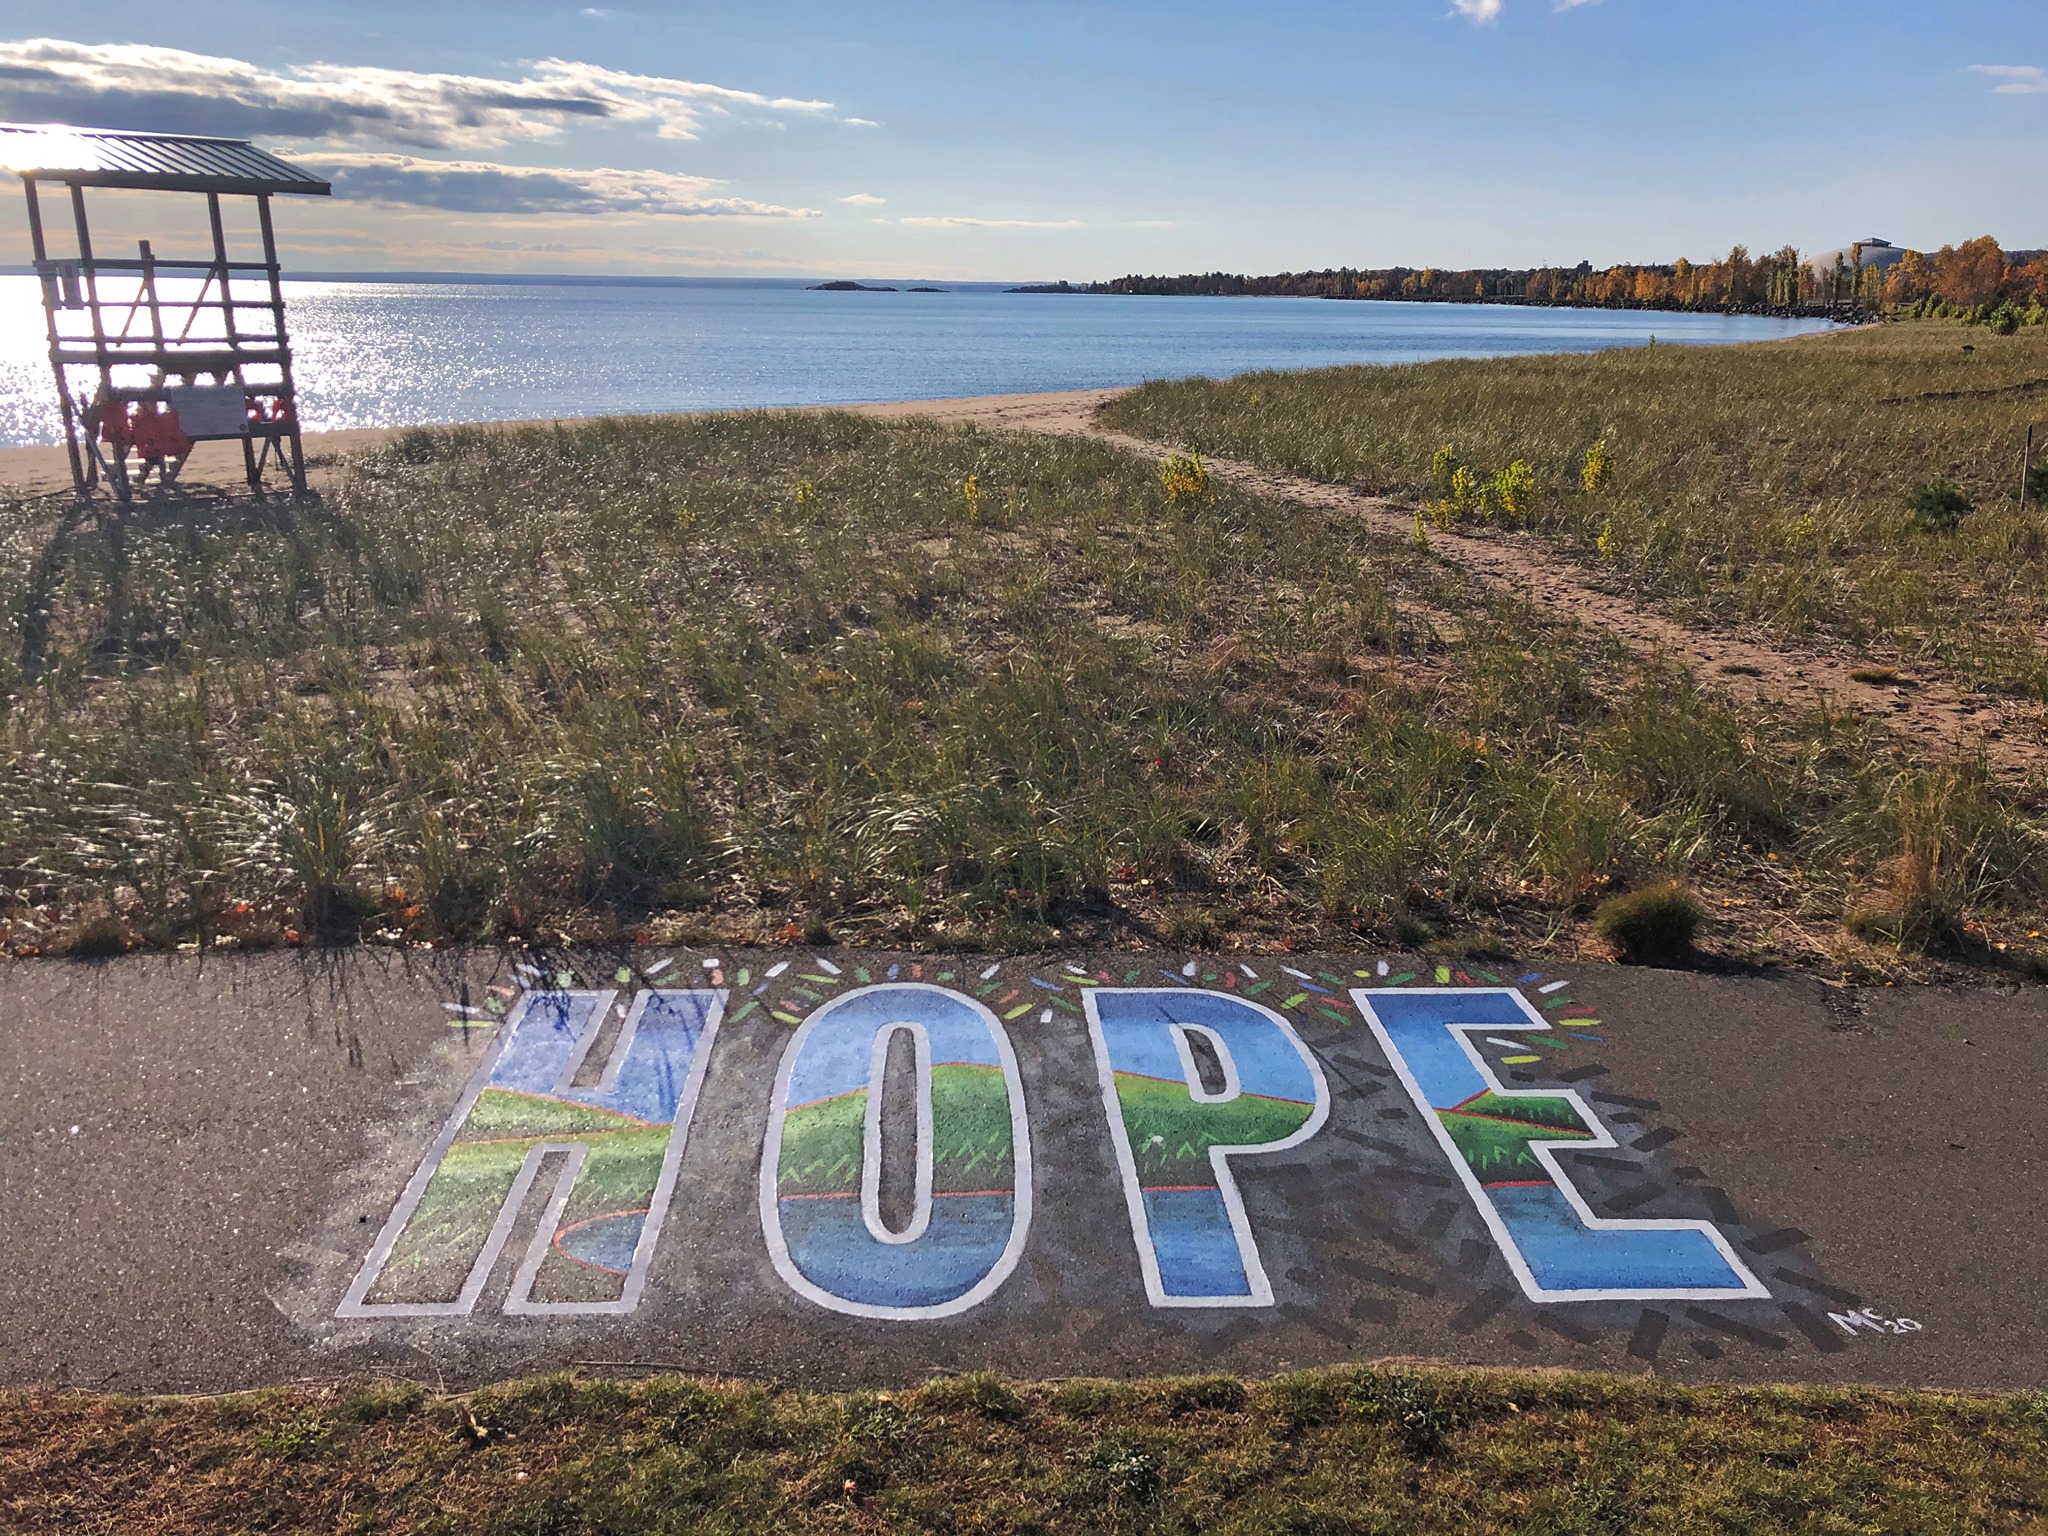 Hope Mural on the bikepath in front of the beach entrance with a lifeguard bench and lakeshore in the background